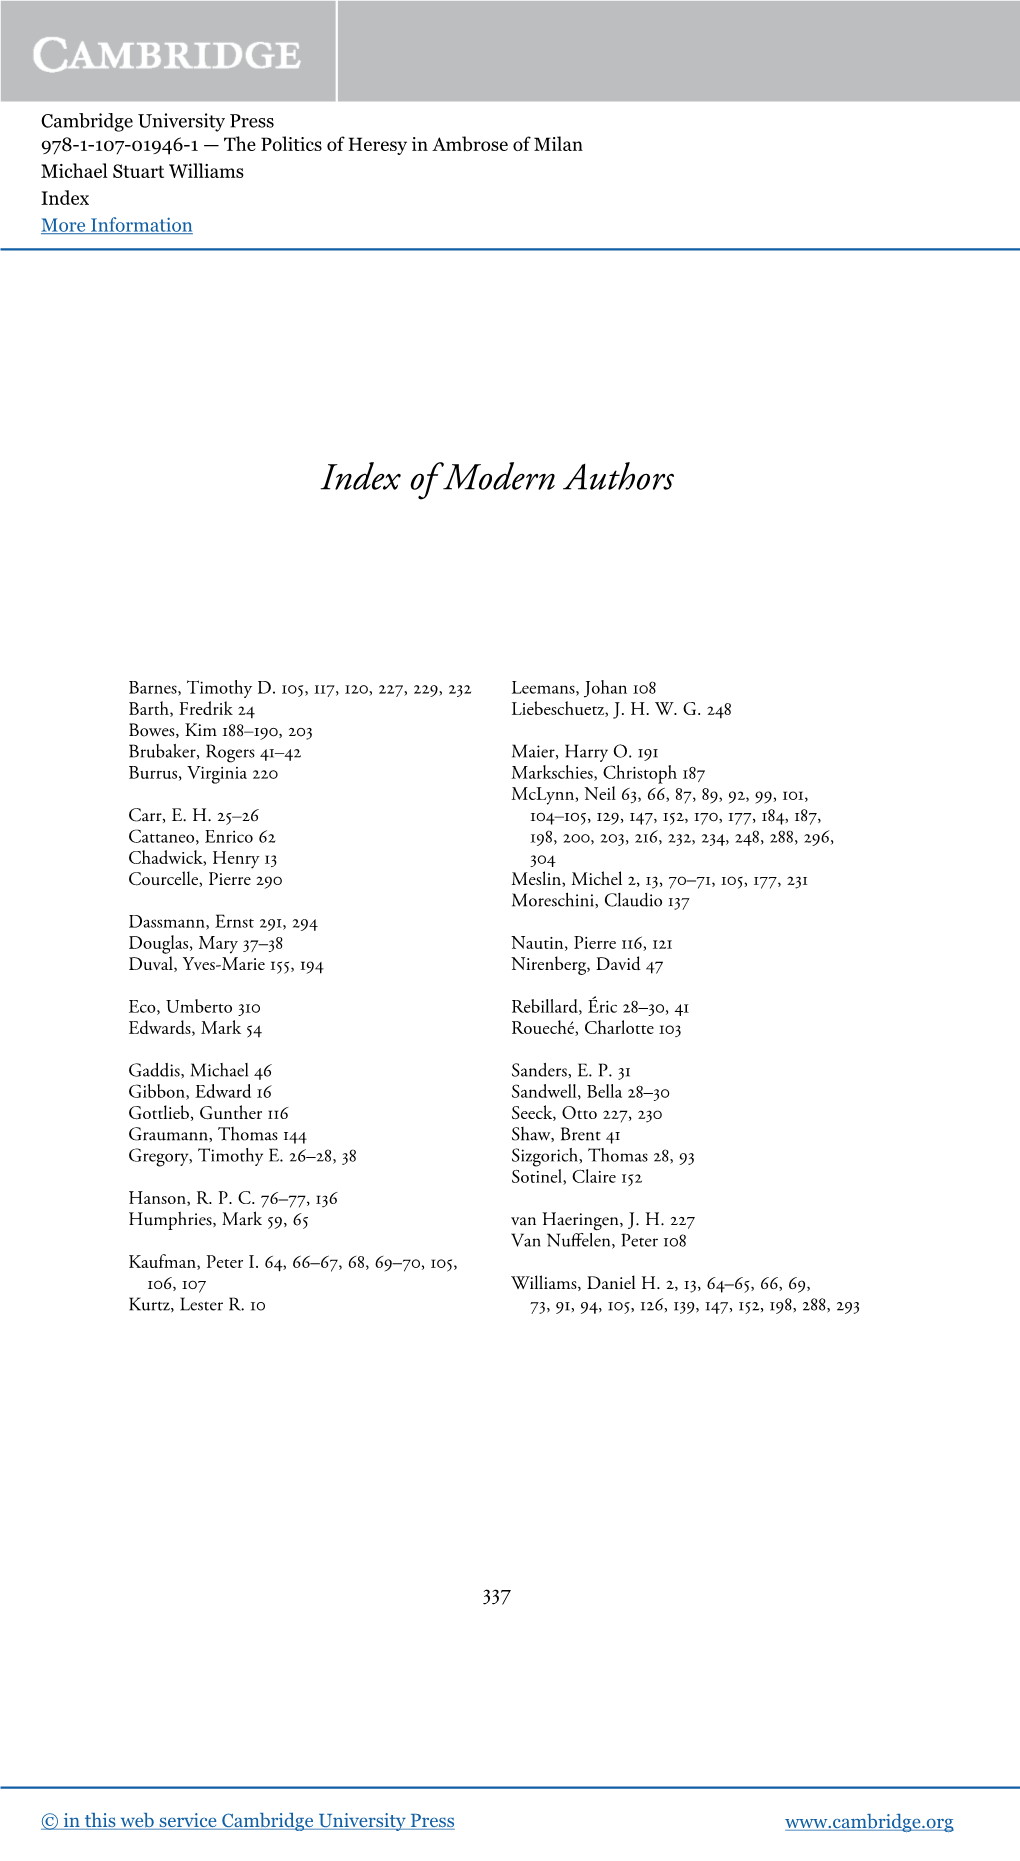 Index of Modern Authors